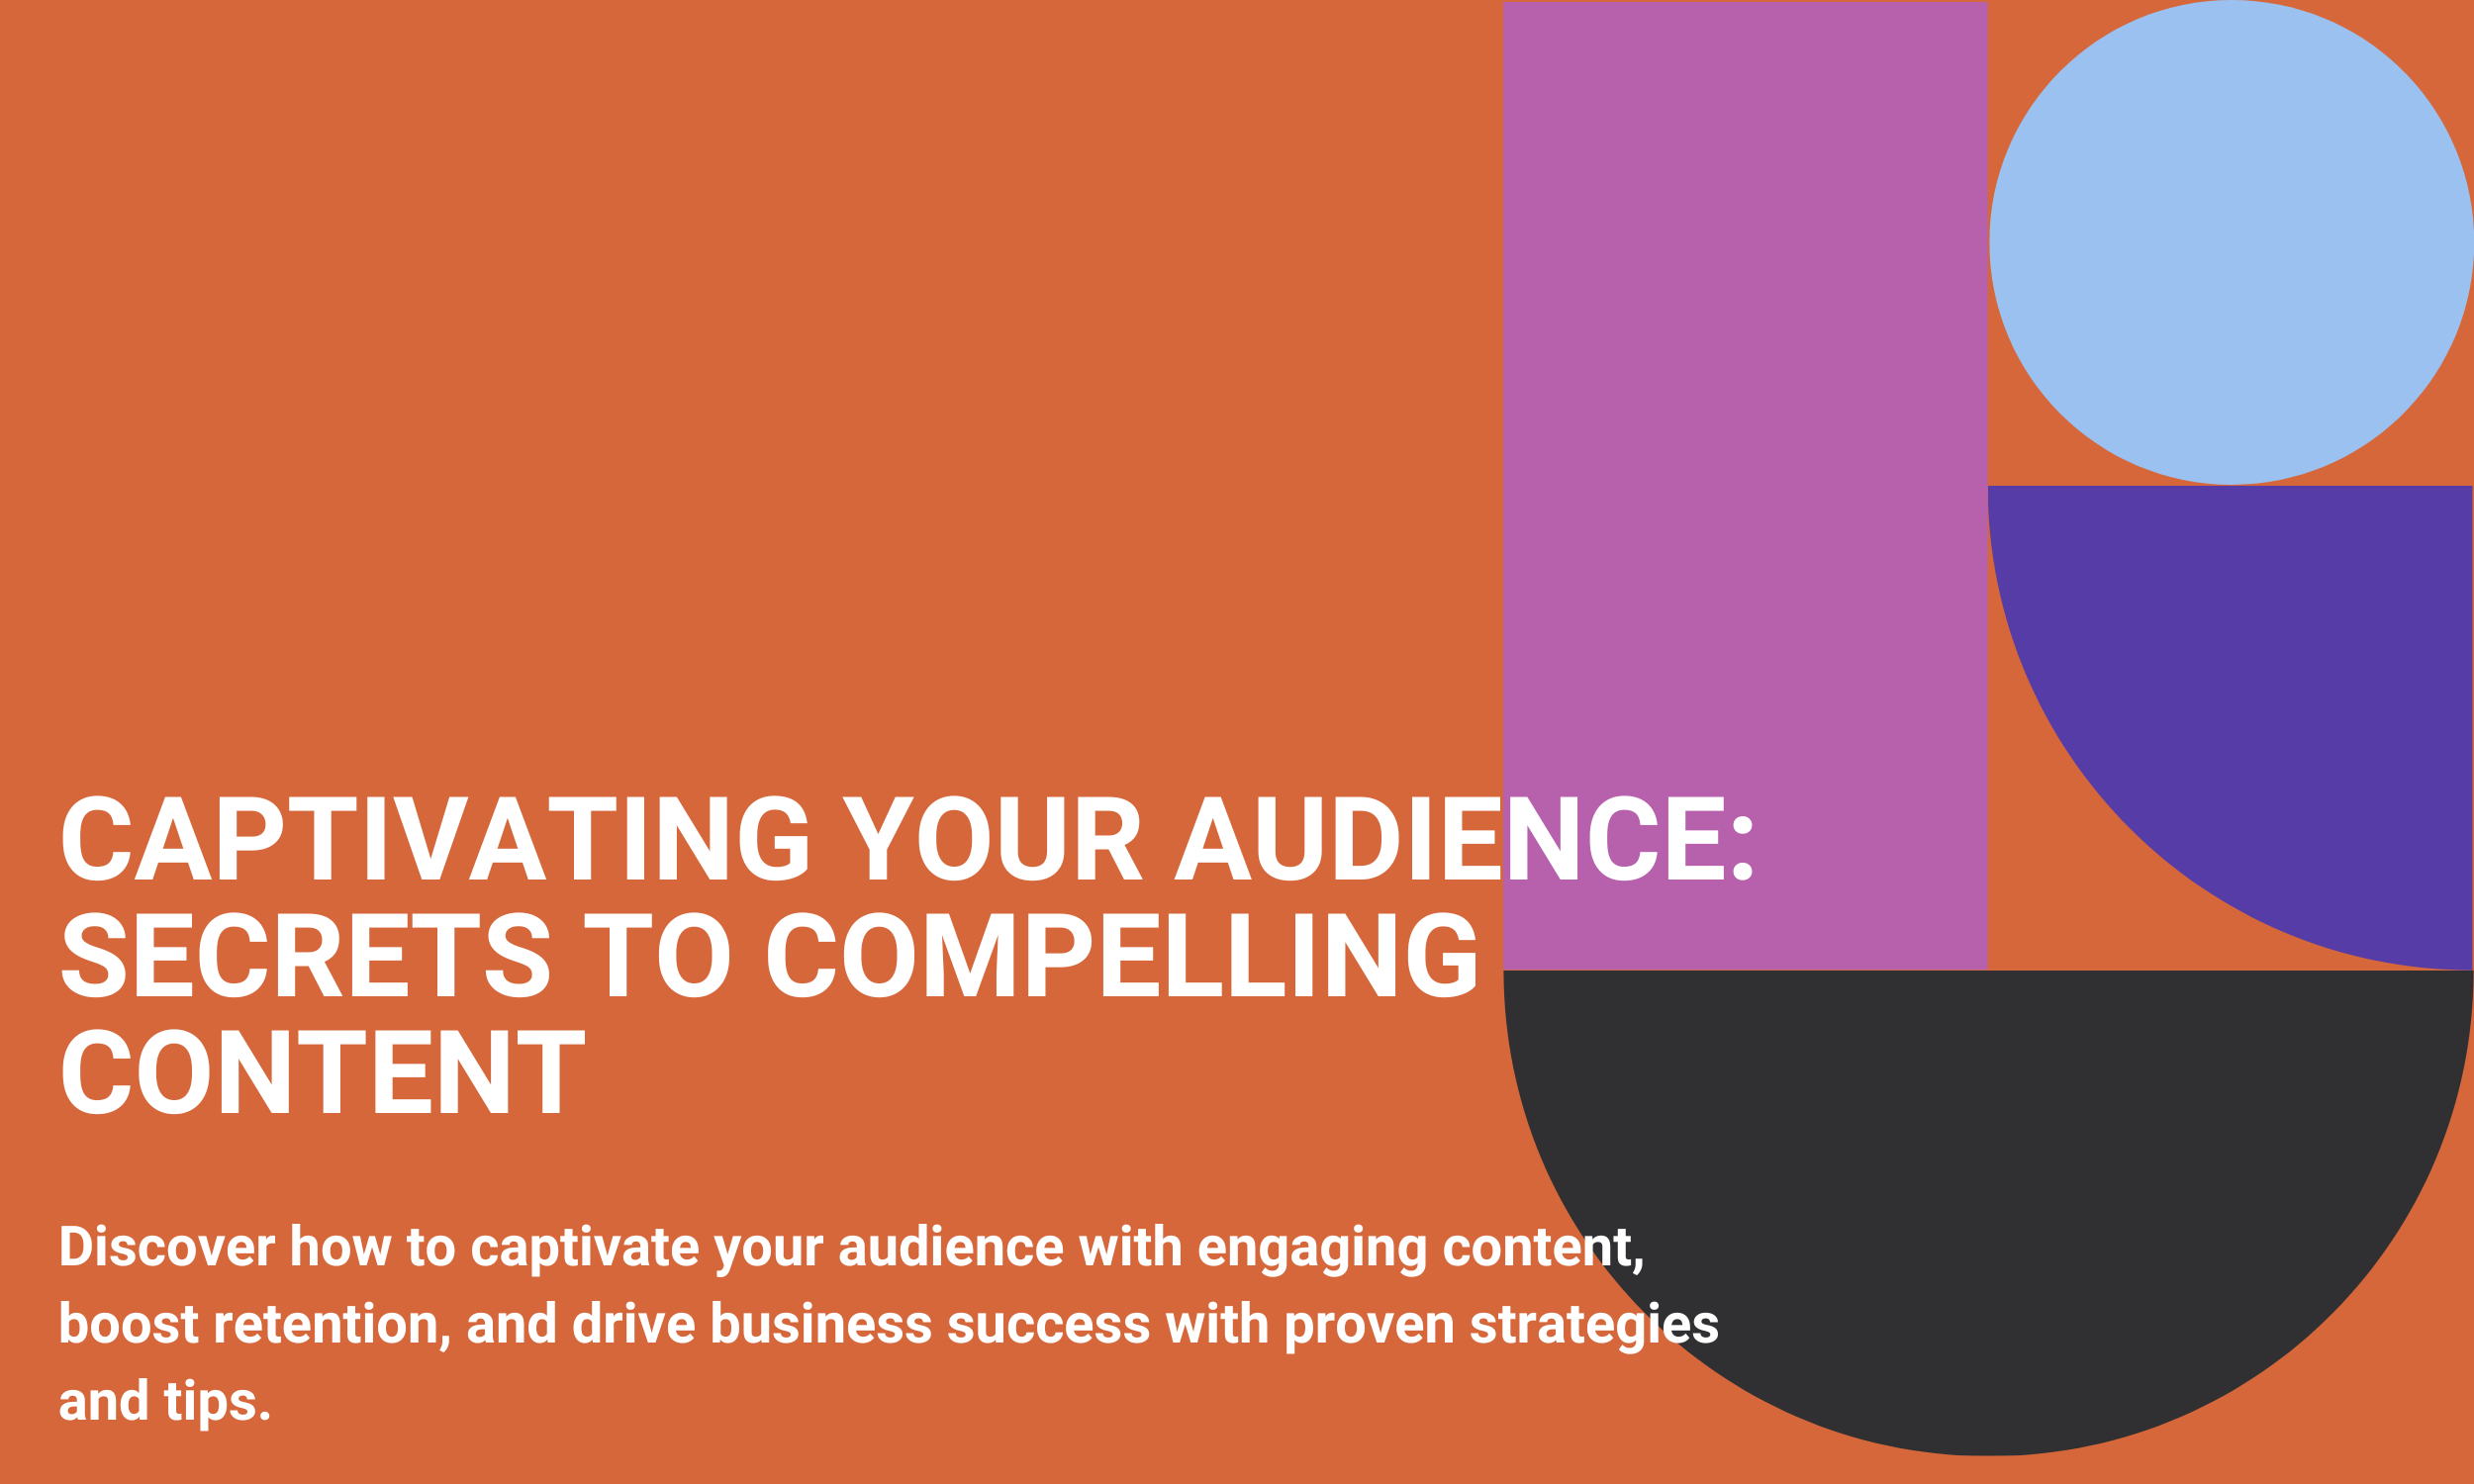 Captivating Your Audience: Secrets to Compelling Content